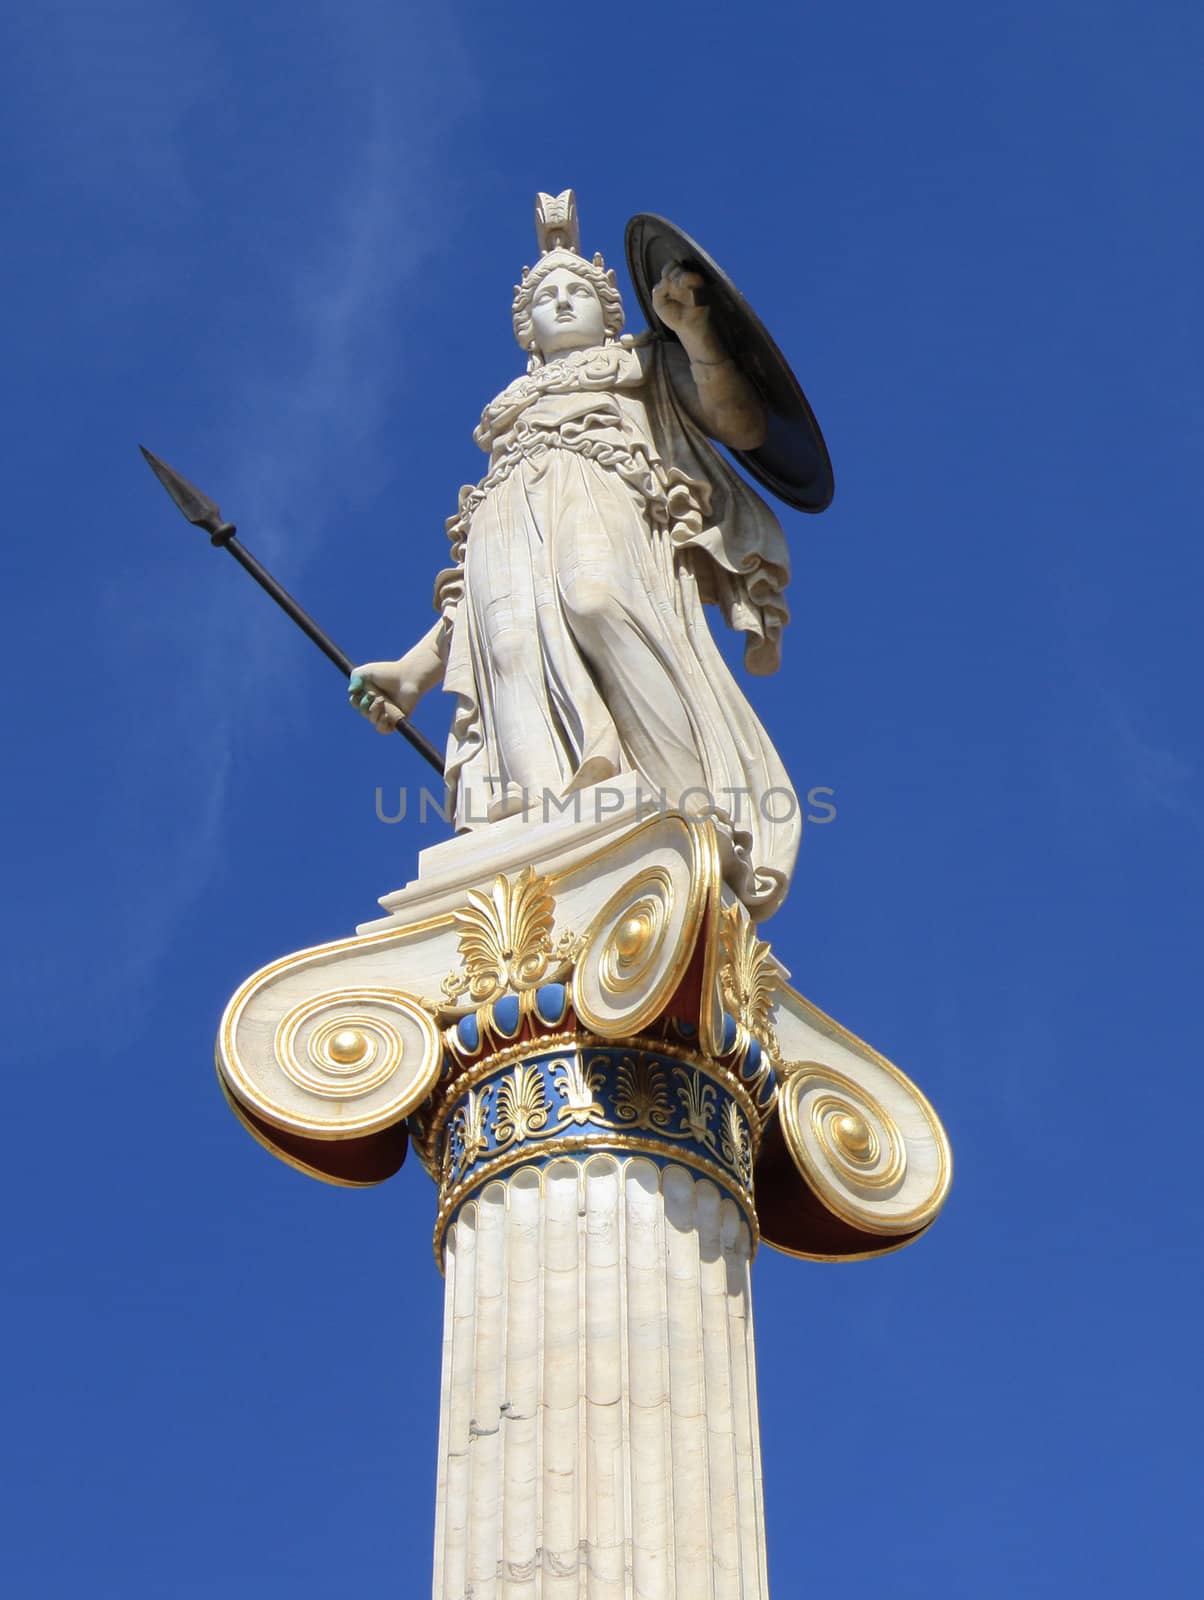 Statue of Athena, goddess of wisdom, defensive war, strategy, industry, justice and skill in ancient Greek mythology. Patron of Athens. Known as Minerva in Roman mythology.